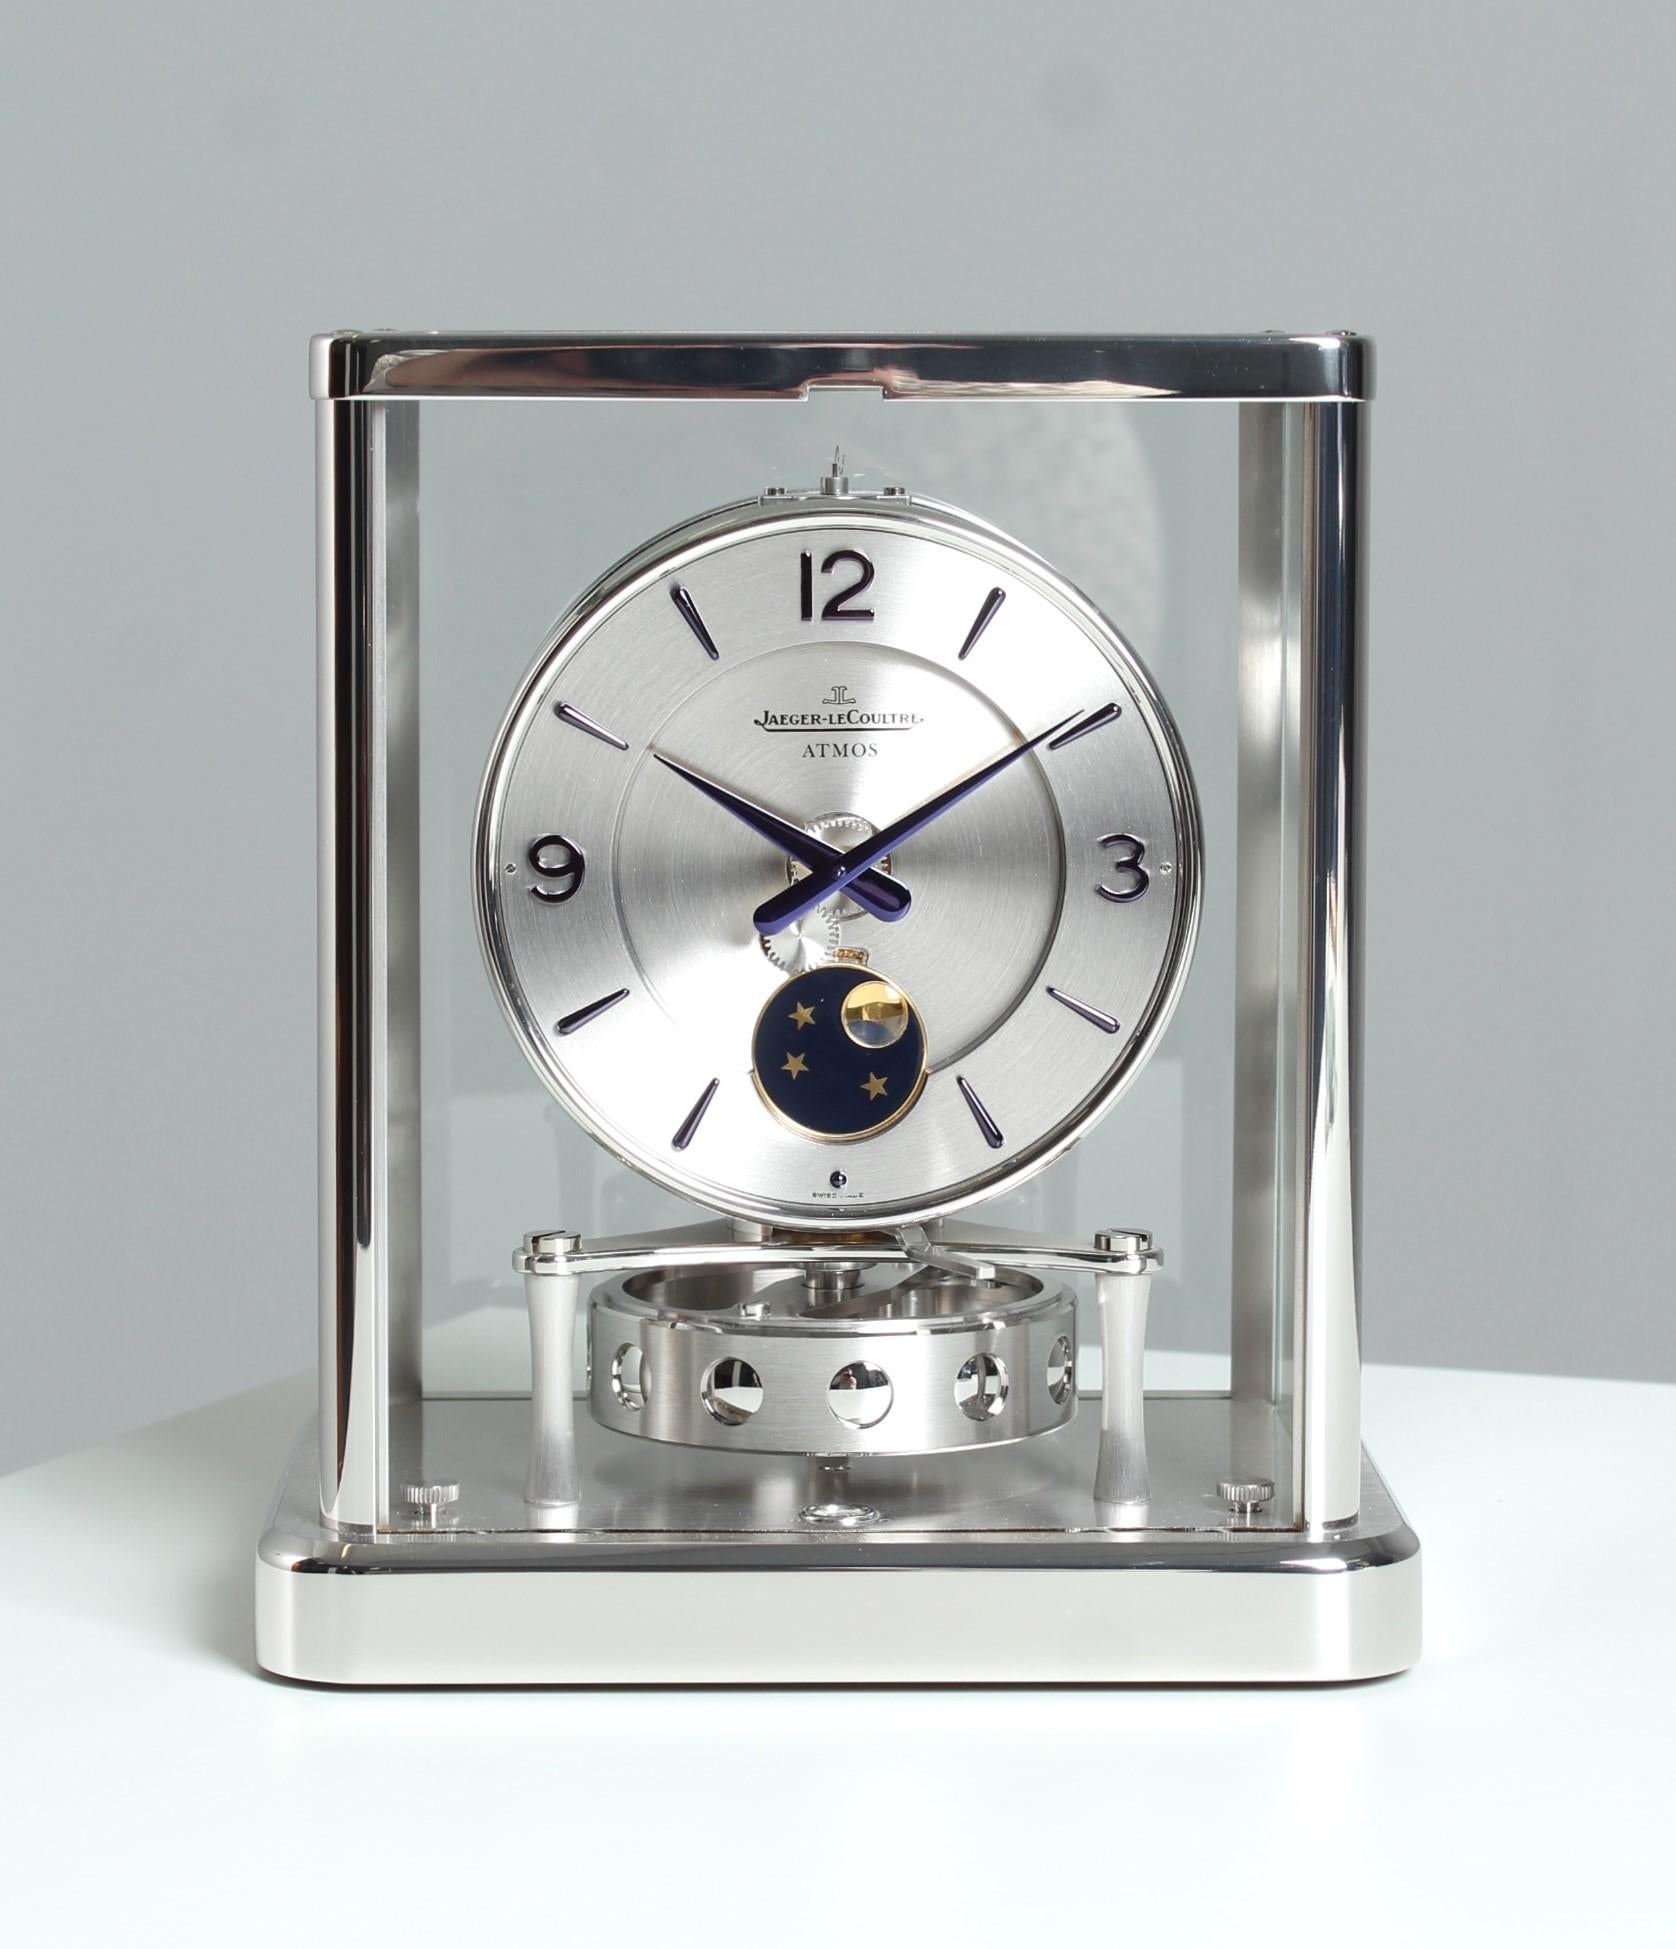 Swiss Jaeger LeCoultre, Atmos Clock with Moon Phase, Rhodium-plated with Wall Console For Sale